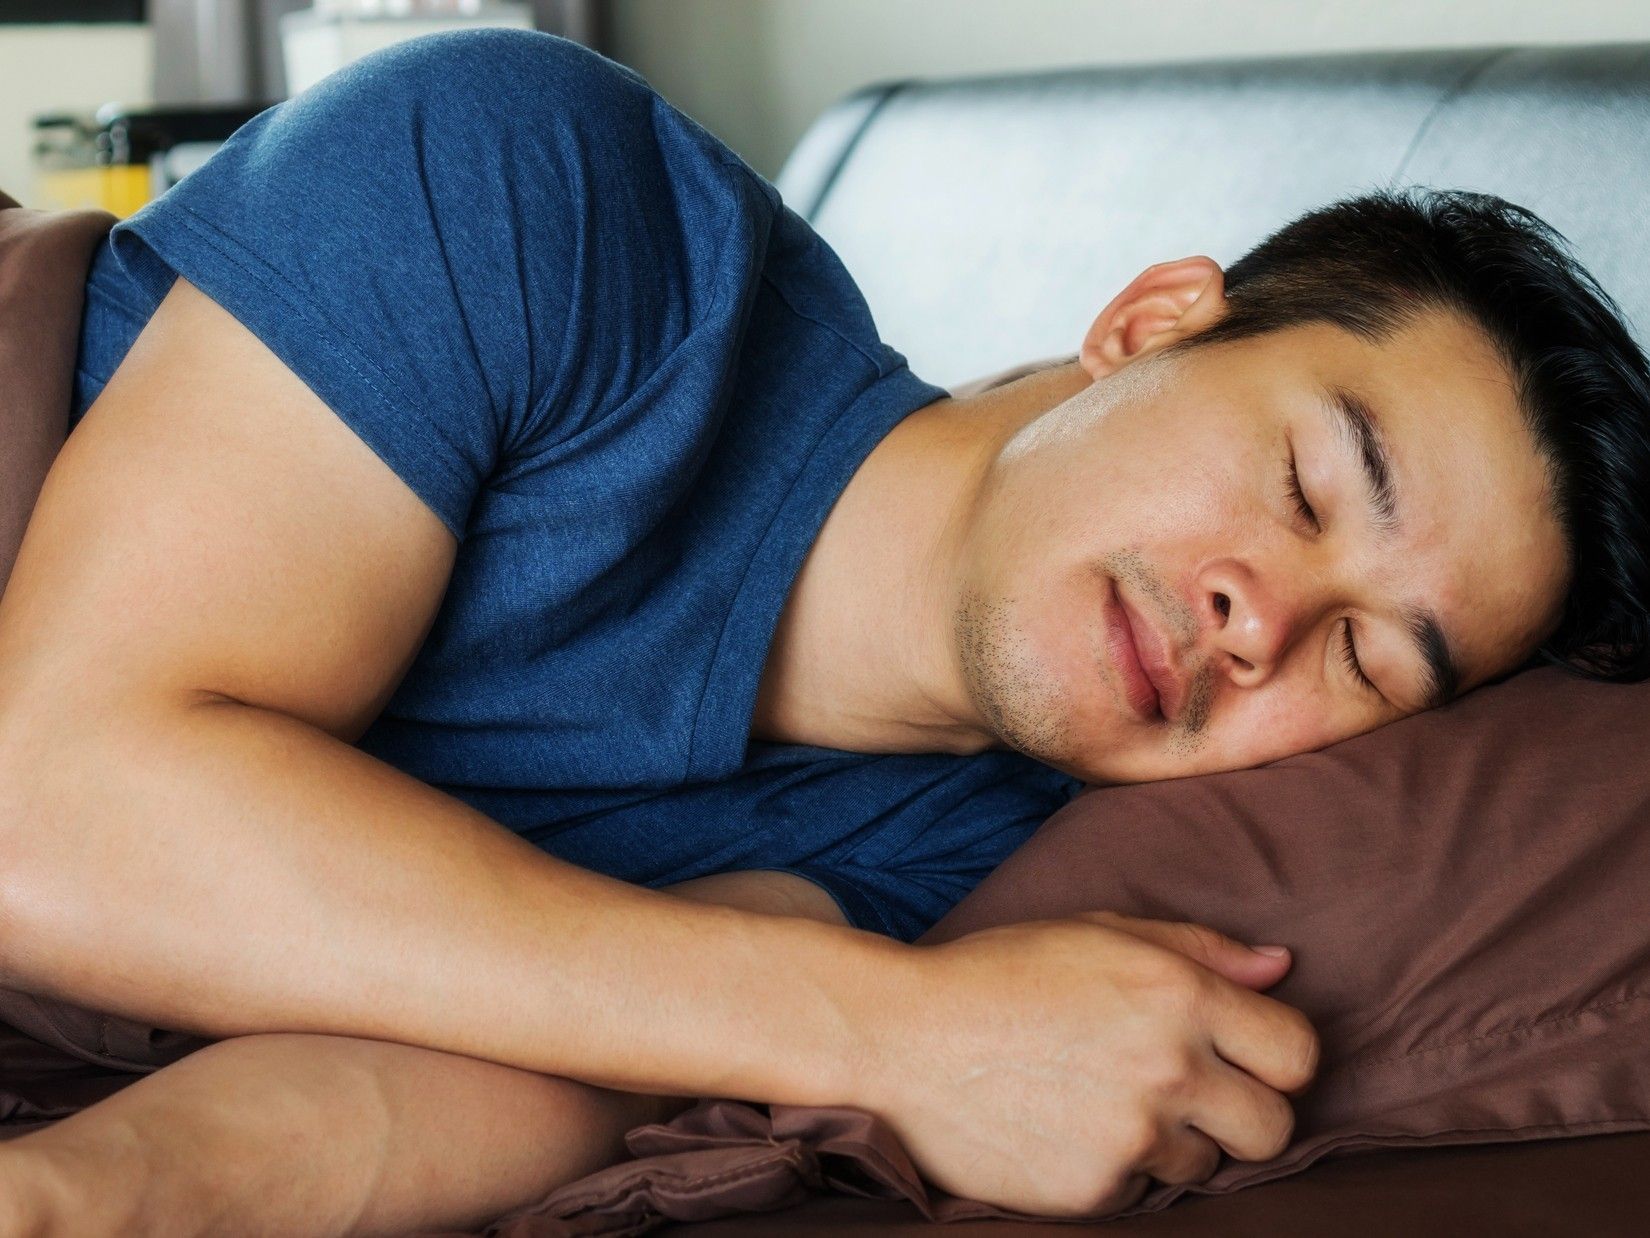 Try improving your sleep hygiene before trying medication.